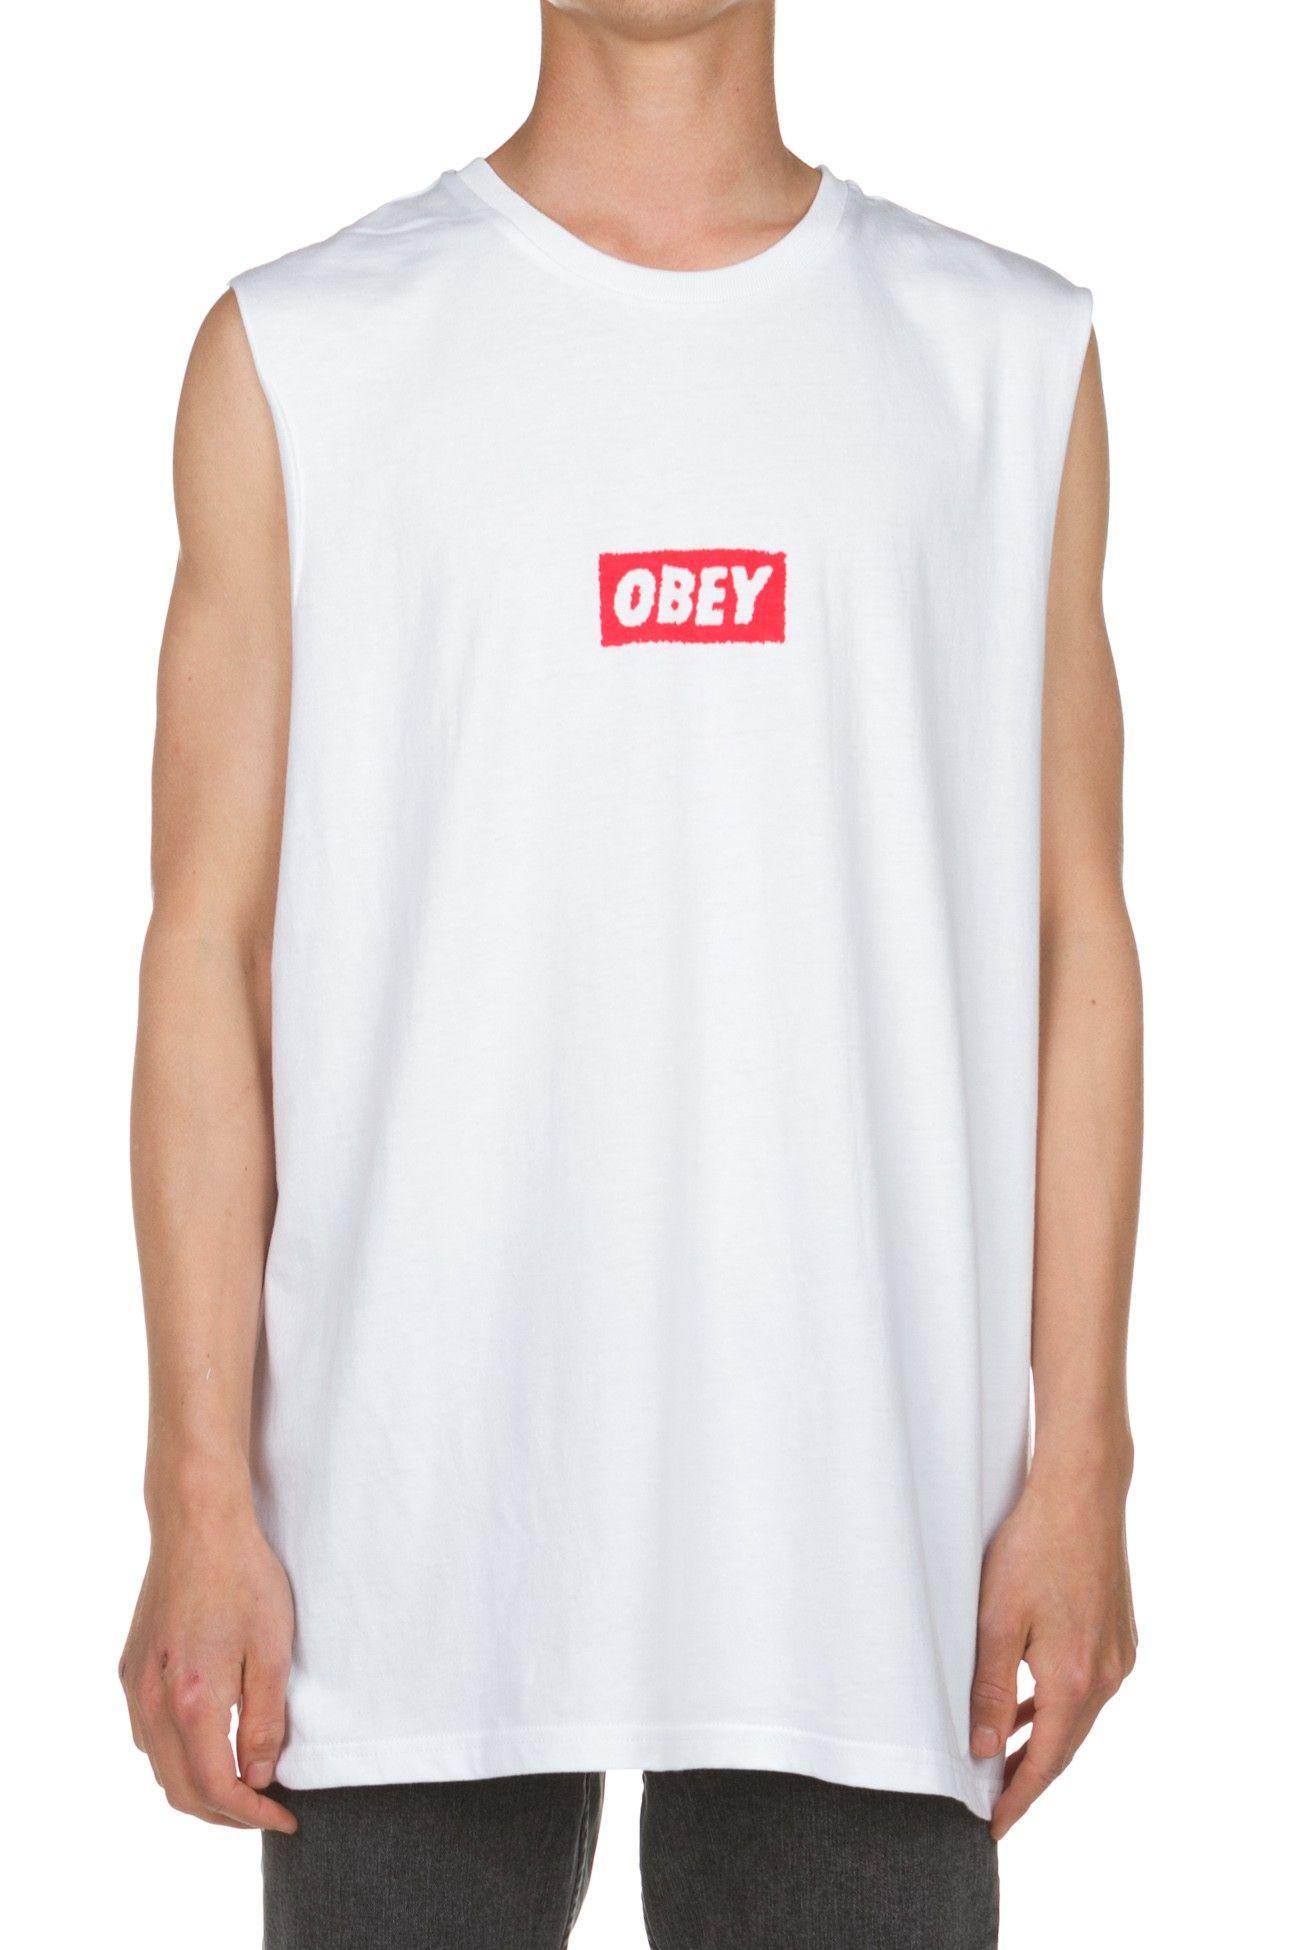 White Pyramid Logo - Buy the Obey Pyramid Logo Muscle in White